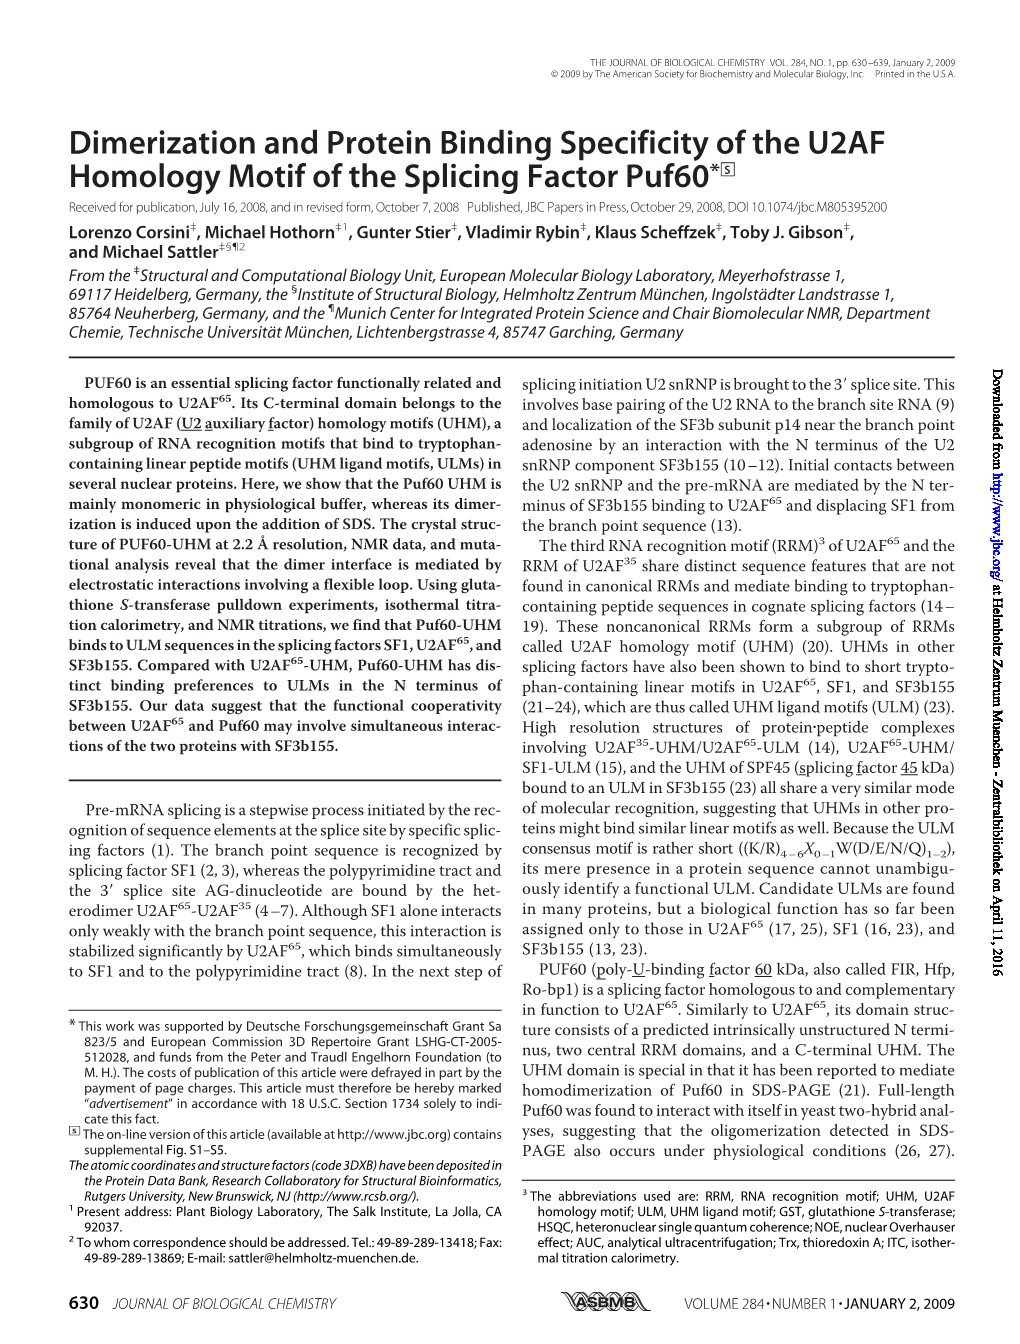 Dimerization and Protein Binding Specificity of the U2AF Homology